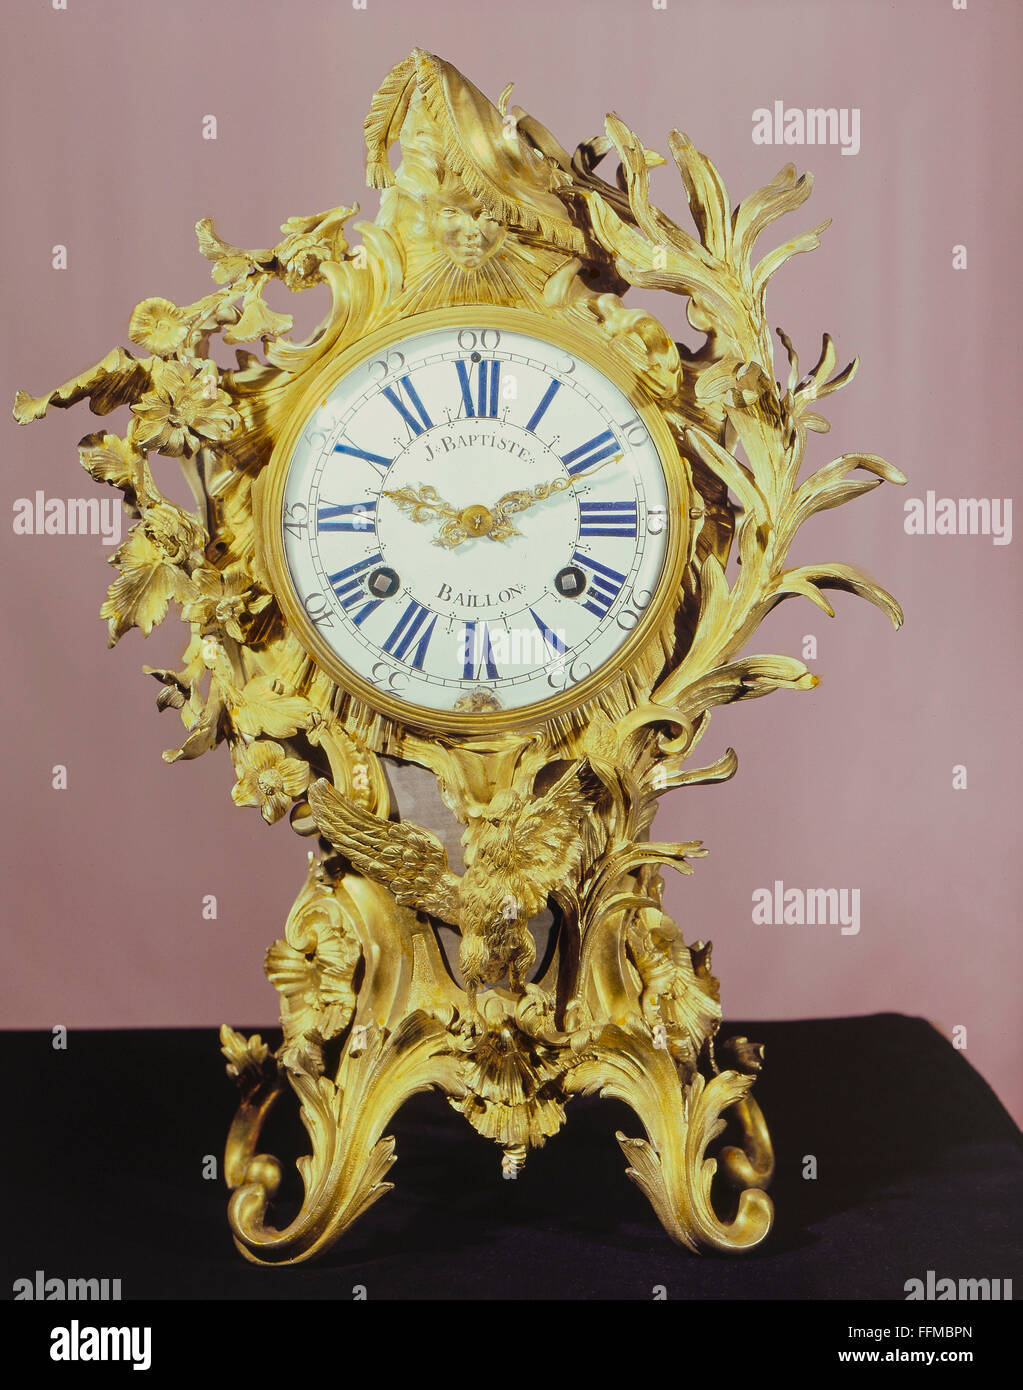 clock, pendulum clock, by Jean Baptiste Baillon, bronze, gold-plated, Paris, 1885, Additional-Rights-Clearences-Not Available Stock Photo